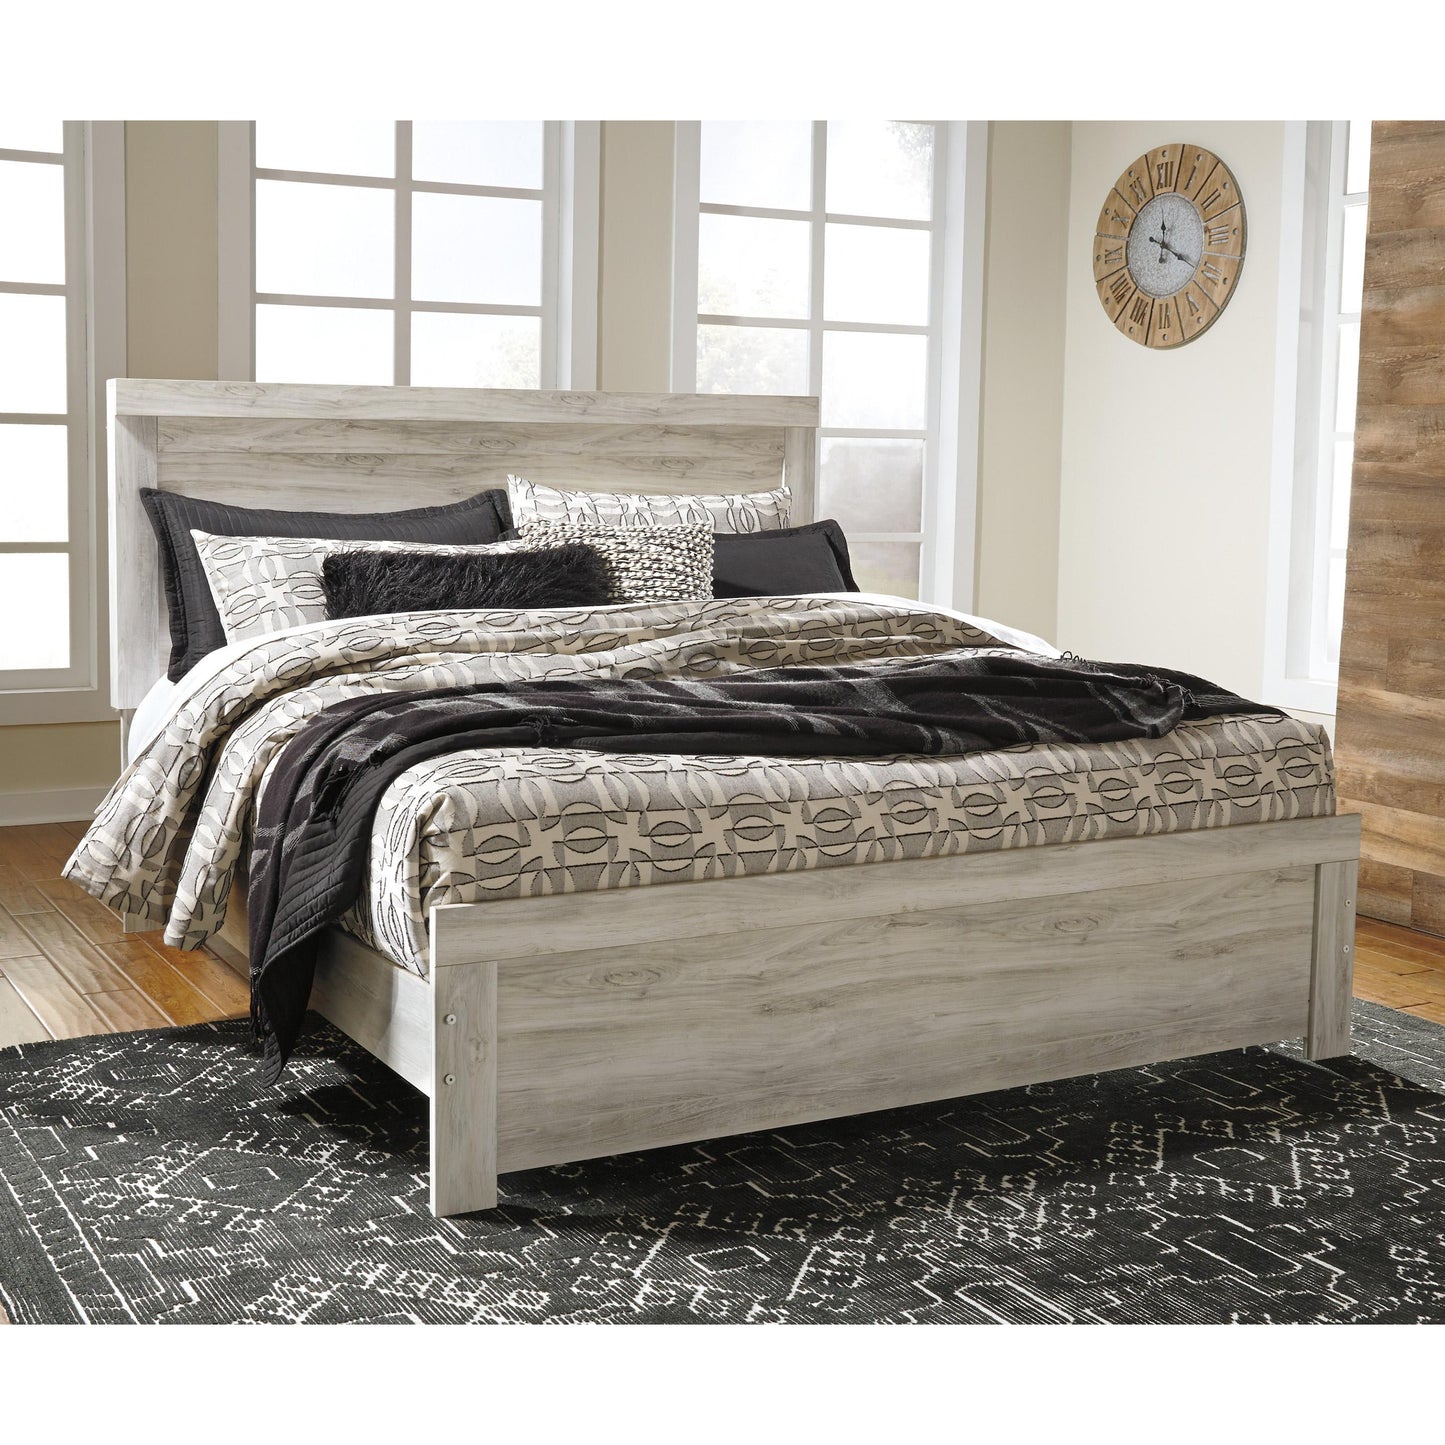 Signature Design by Ashley Bellaby King Panel Bed B331-58/B331-56/B331-97